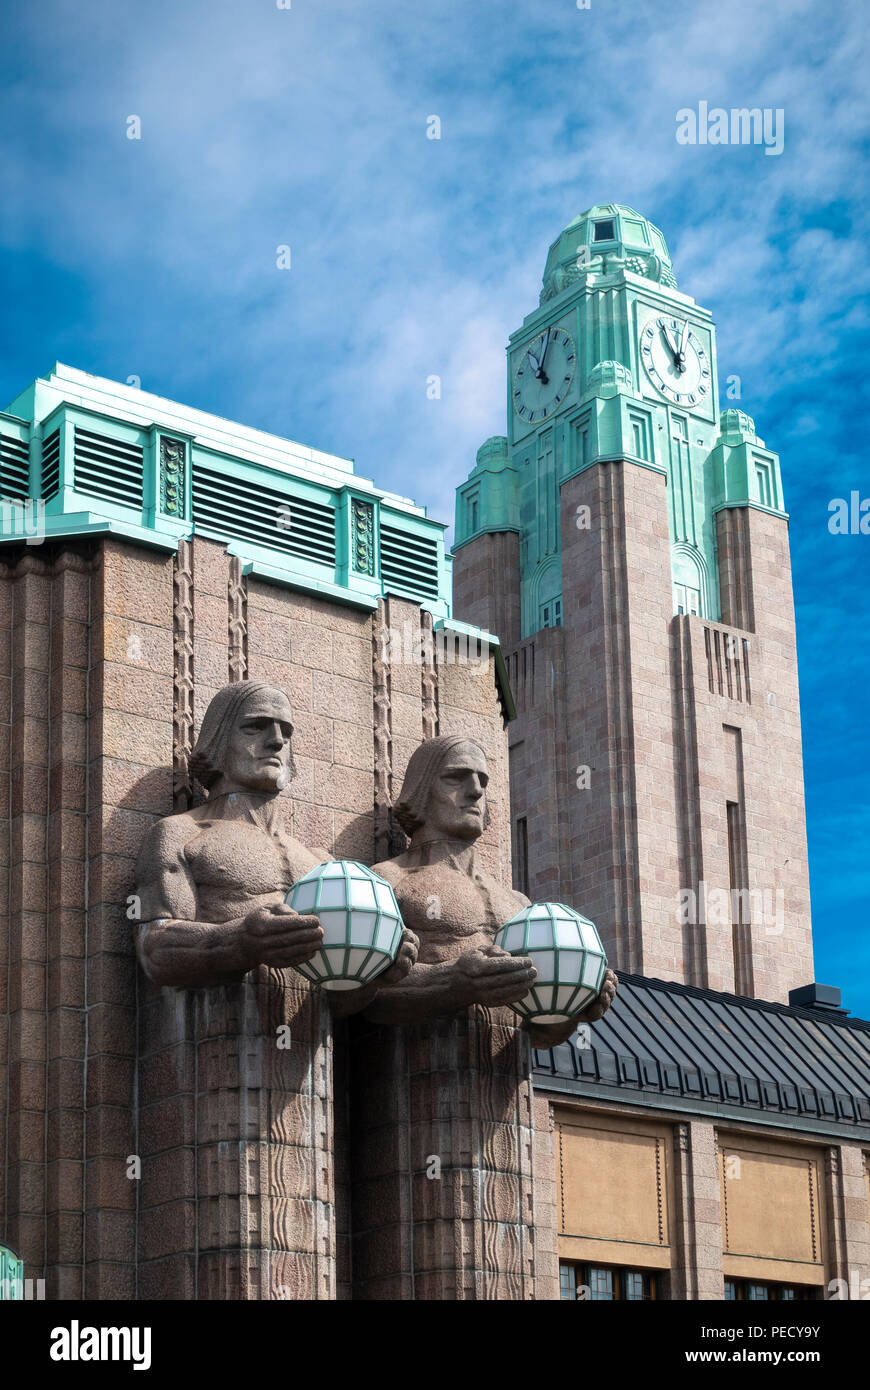 Central Railway Station Helsinki with two stone men statues holding lamps and the Station clock tower. Stock Photo